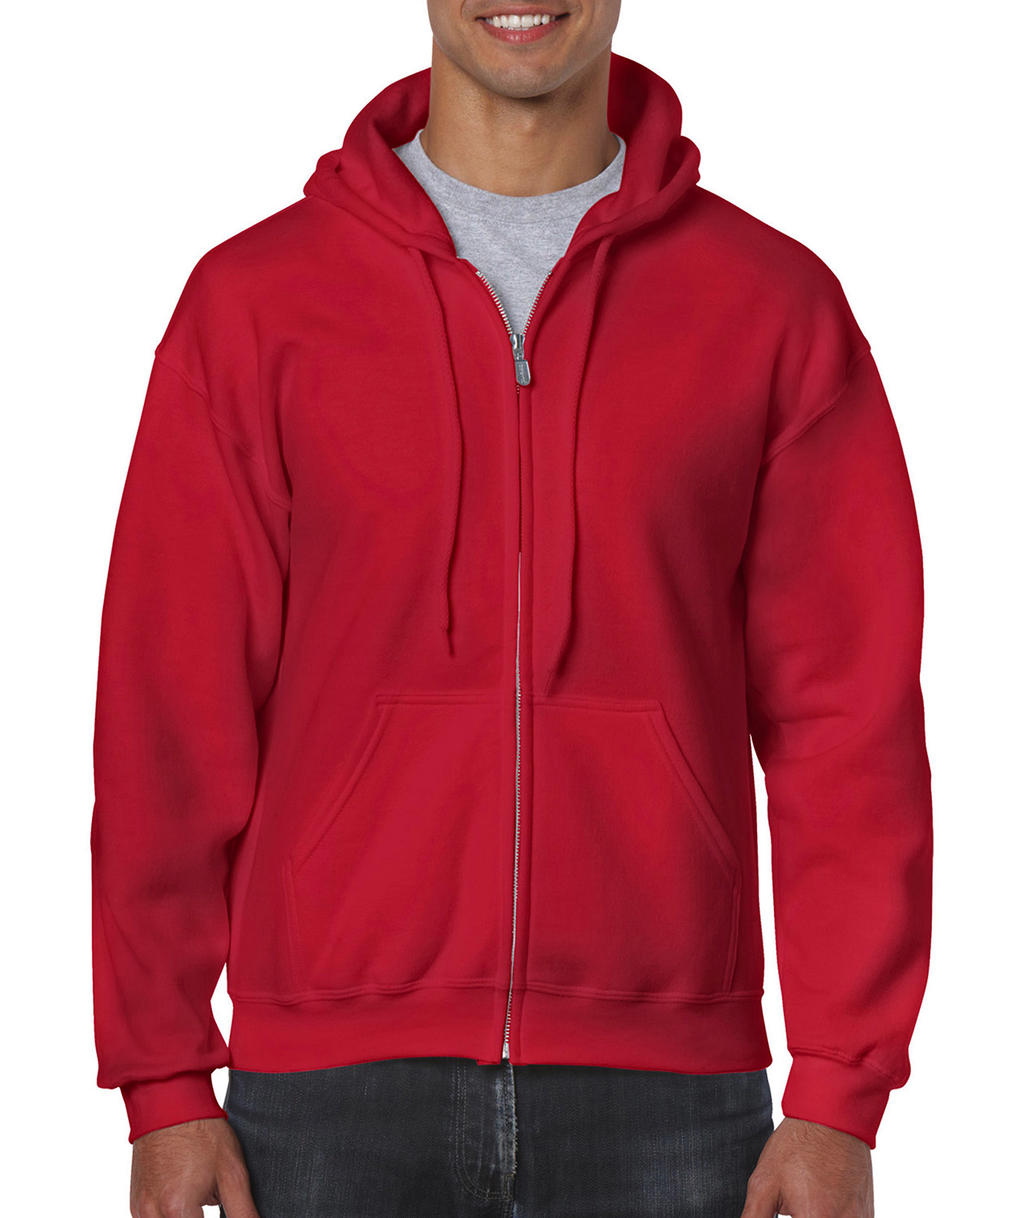  Heavy Blend Adult Full Zip Hooded Sweat in Farbe Red